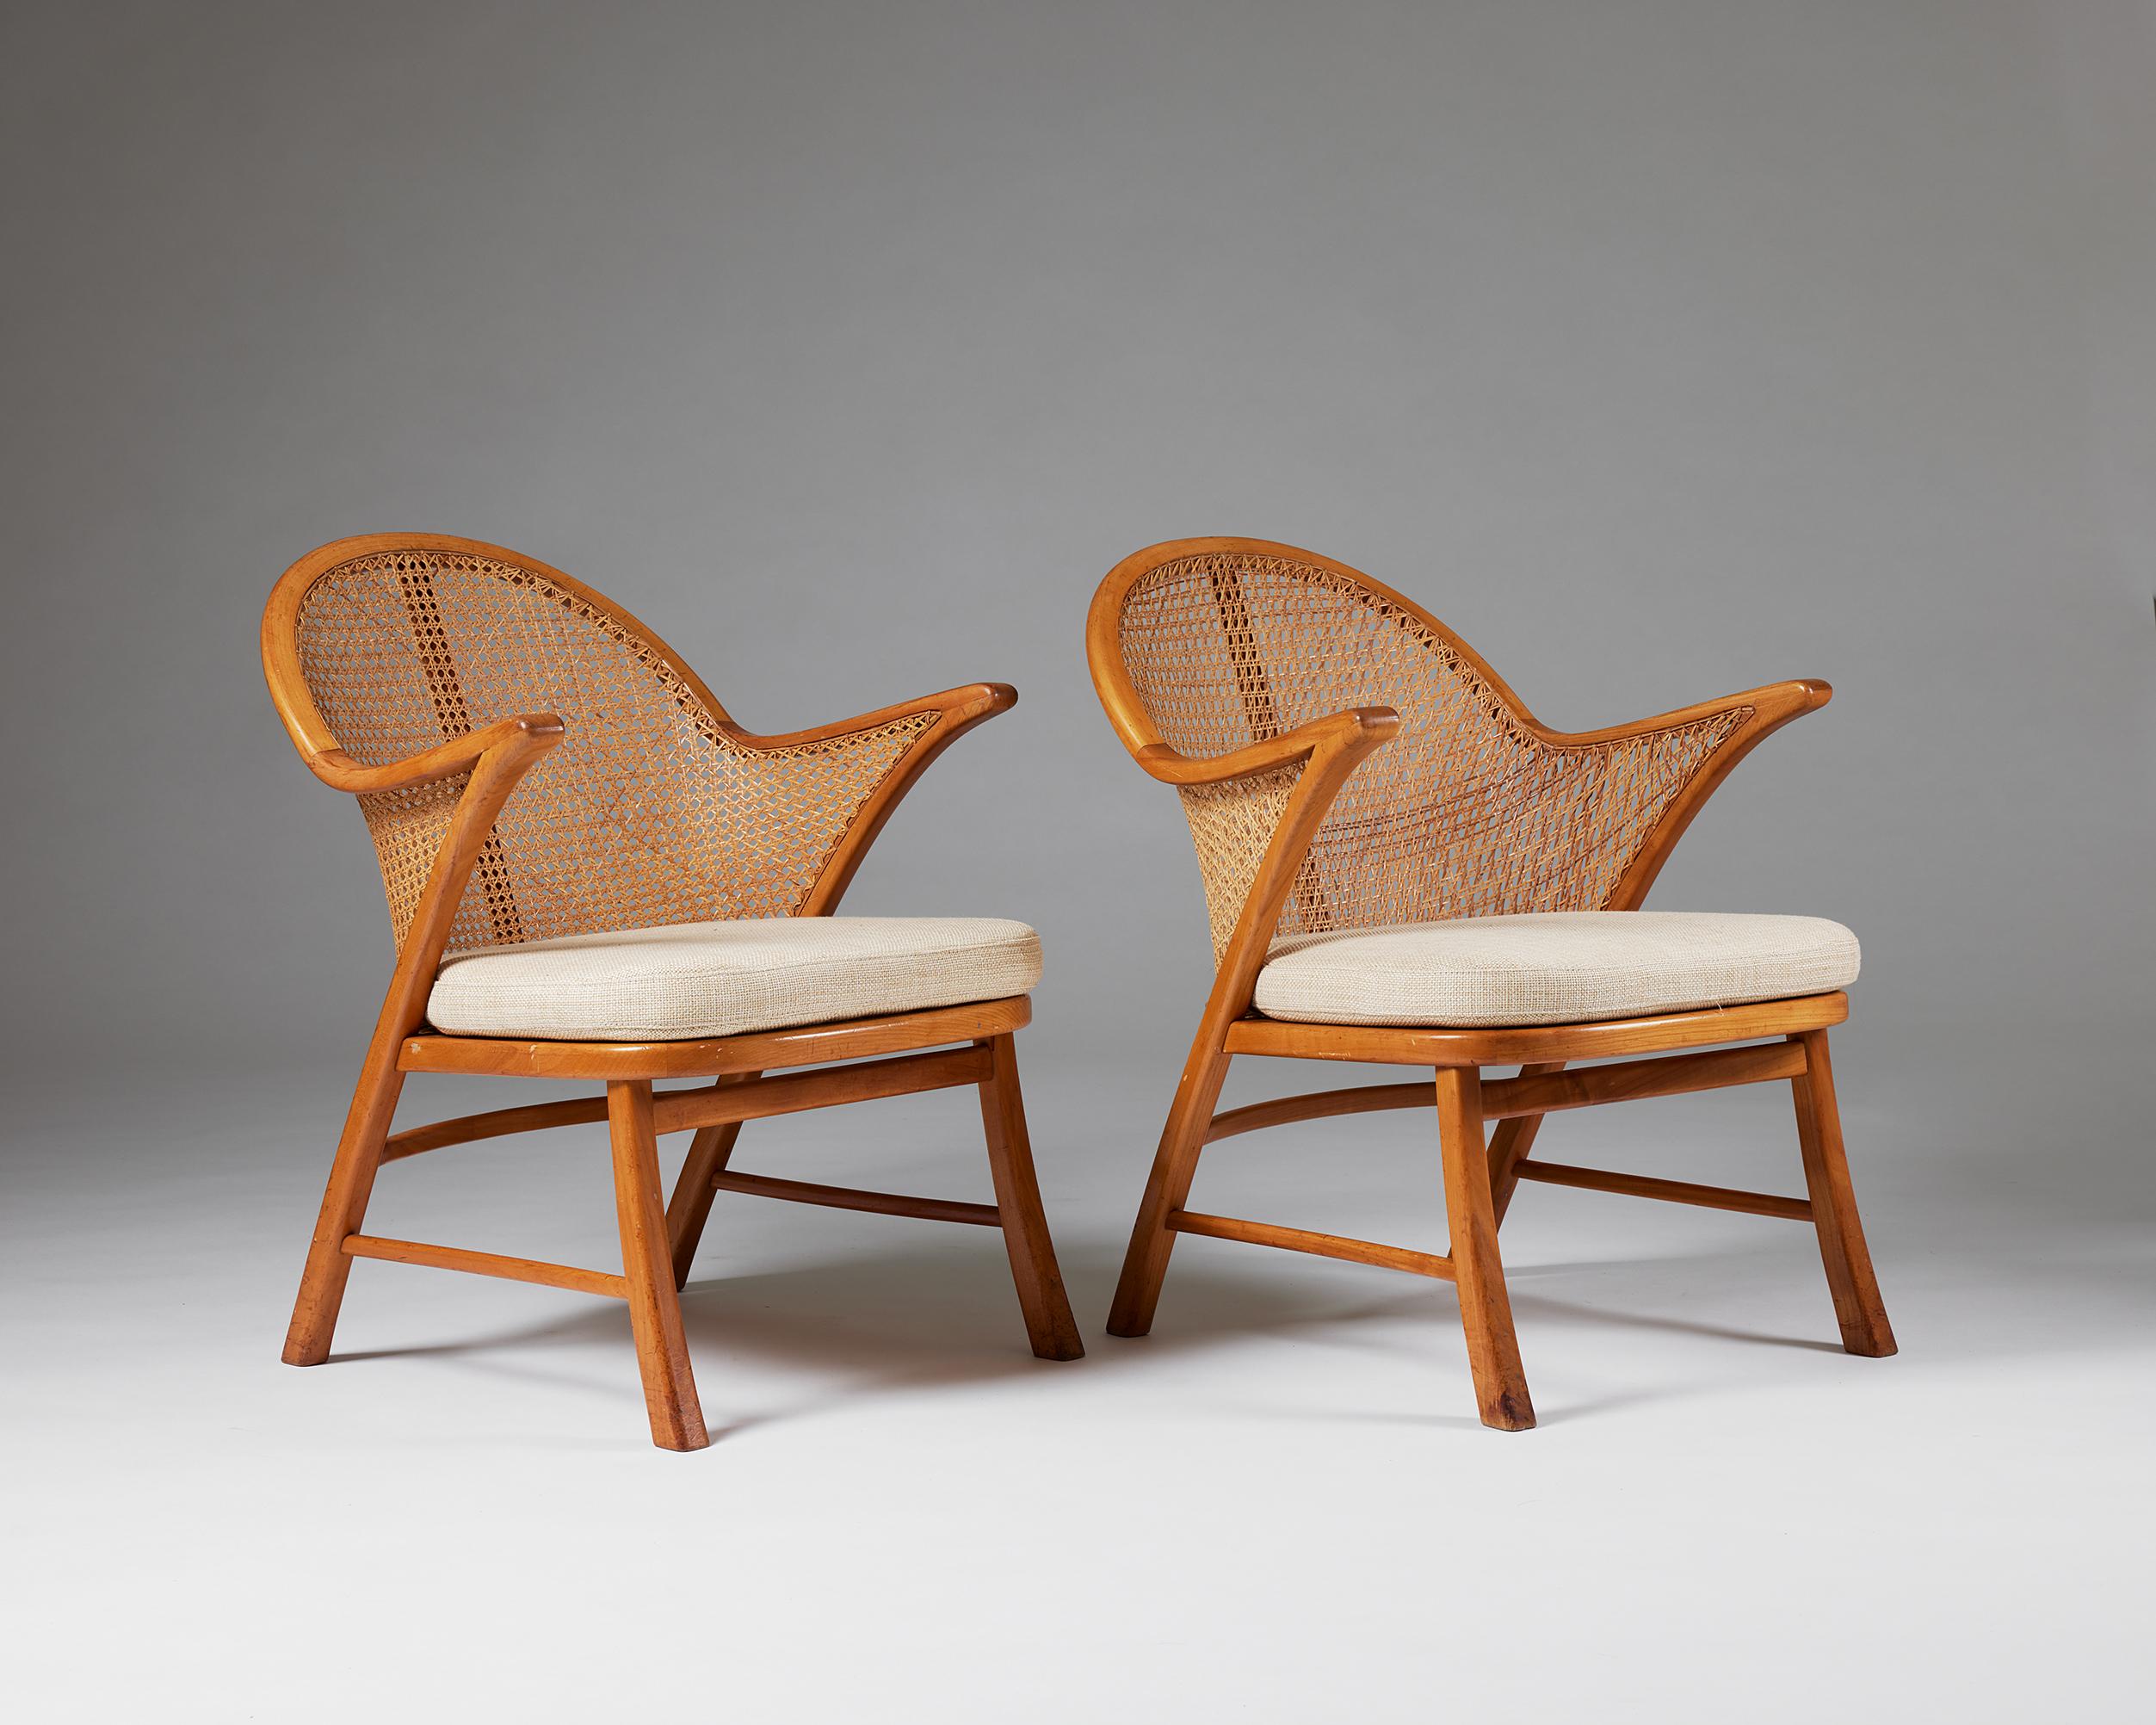 Pair of armchairs attributed to Frits Schlegel,
Denmark, 1930s-1940s

Walnut and rattan.

Signed.

Designed in the 1930s-1940s and beautifully crafted in walnut and rattan, the shape of these seating pieces is particularly striking. The